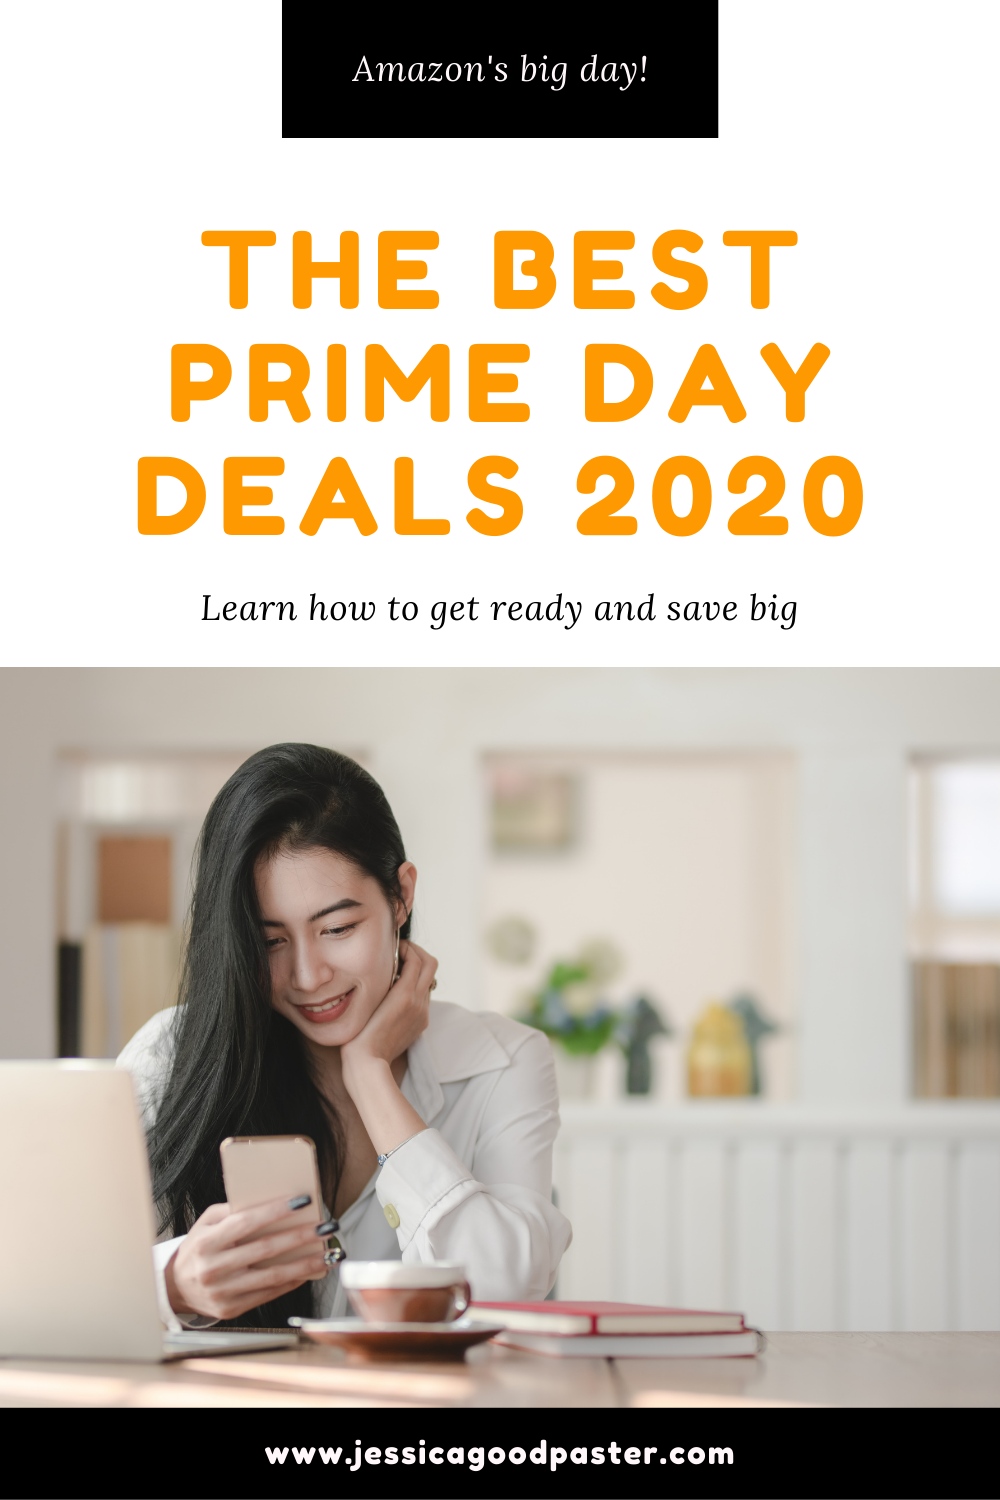 The Best Amazon Prime Day Deals 2020 | Learn how to get ready and save big on Amazon's biggest shopping day! Get huge savings on toys, electronics, clothes, gifts, computers, and more with Prime Day 2020. The epic day is October 13, but there will be early Prime deals and tons of savings leading up to the main event. #amazon #primeday #primeday2020 #deals #giftideas 